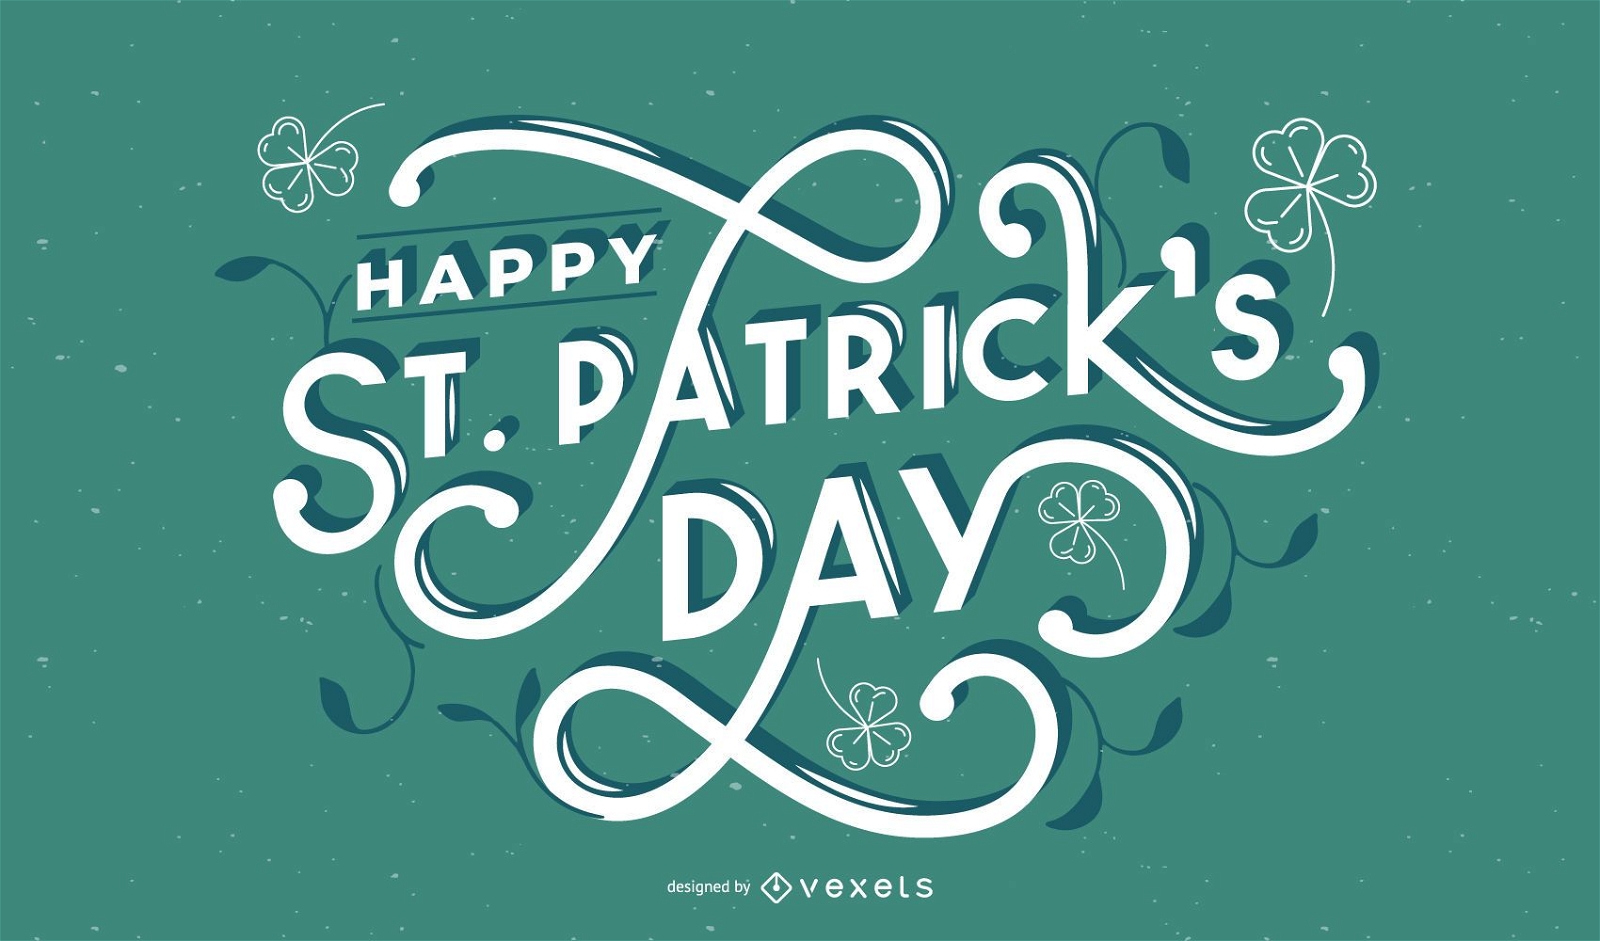 Happy st patrick's day lettering